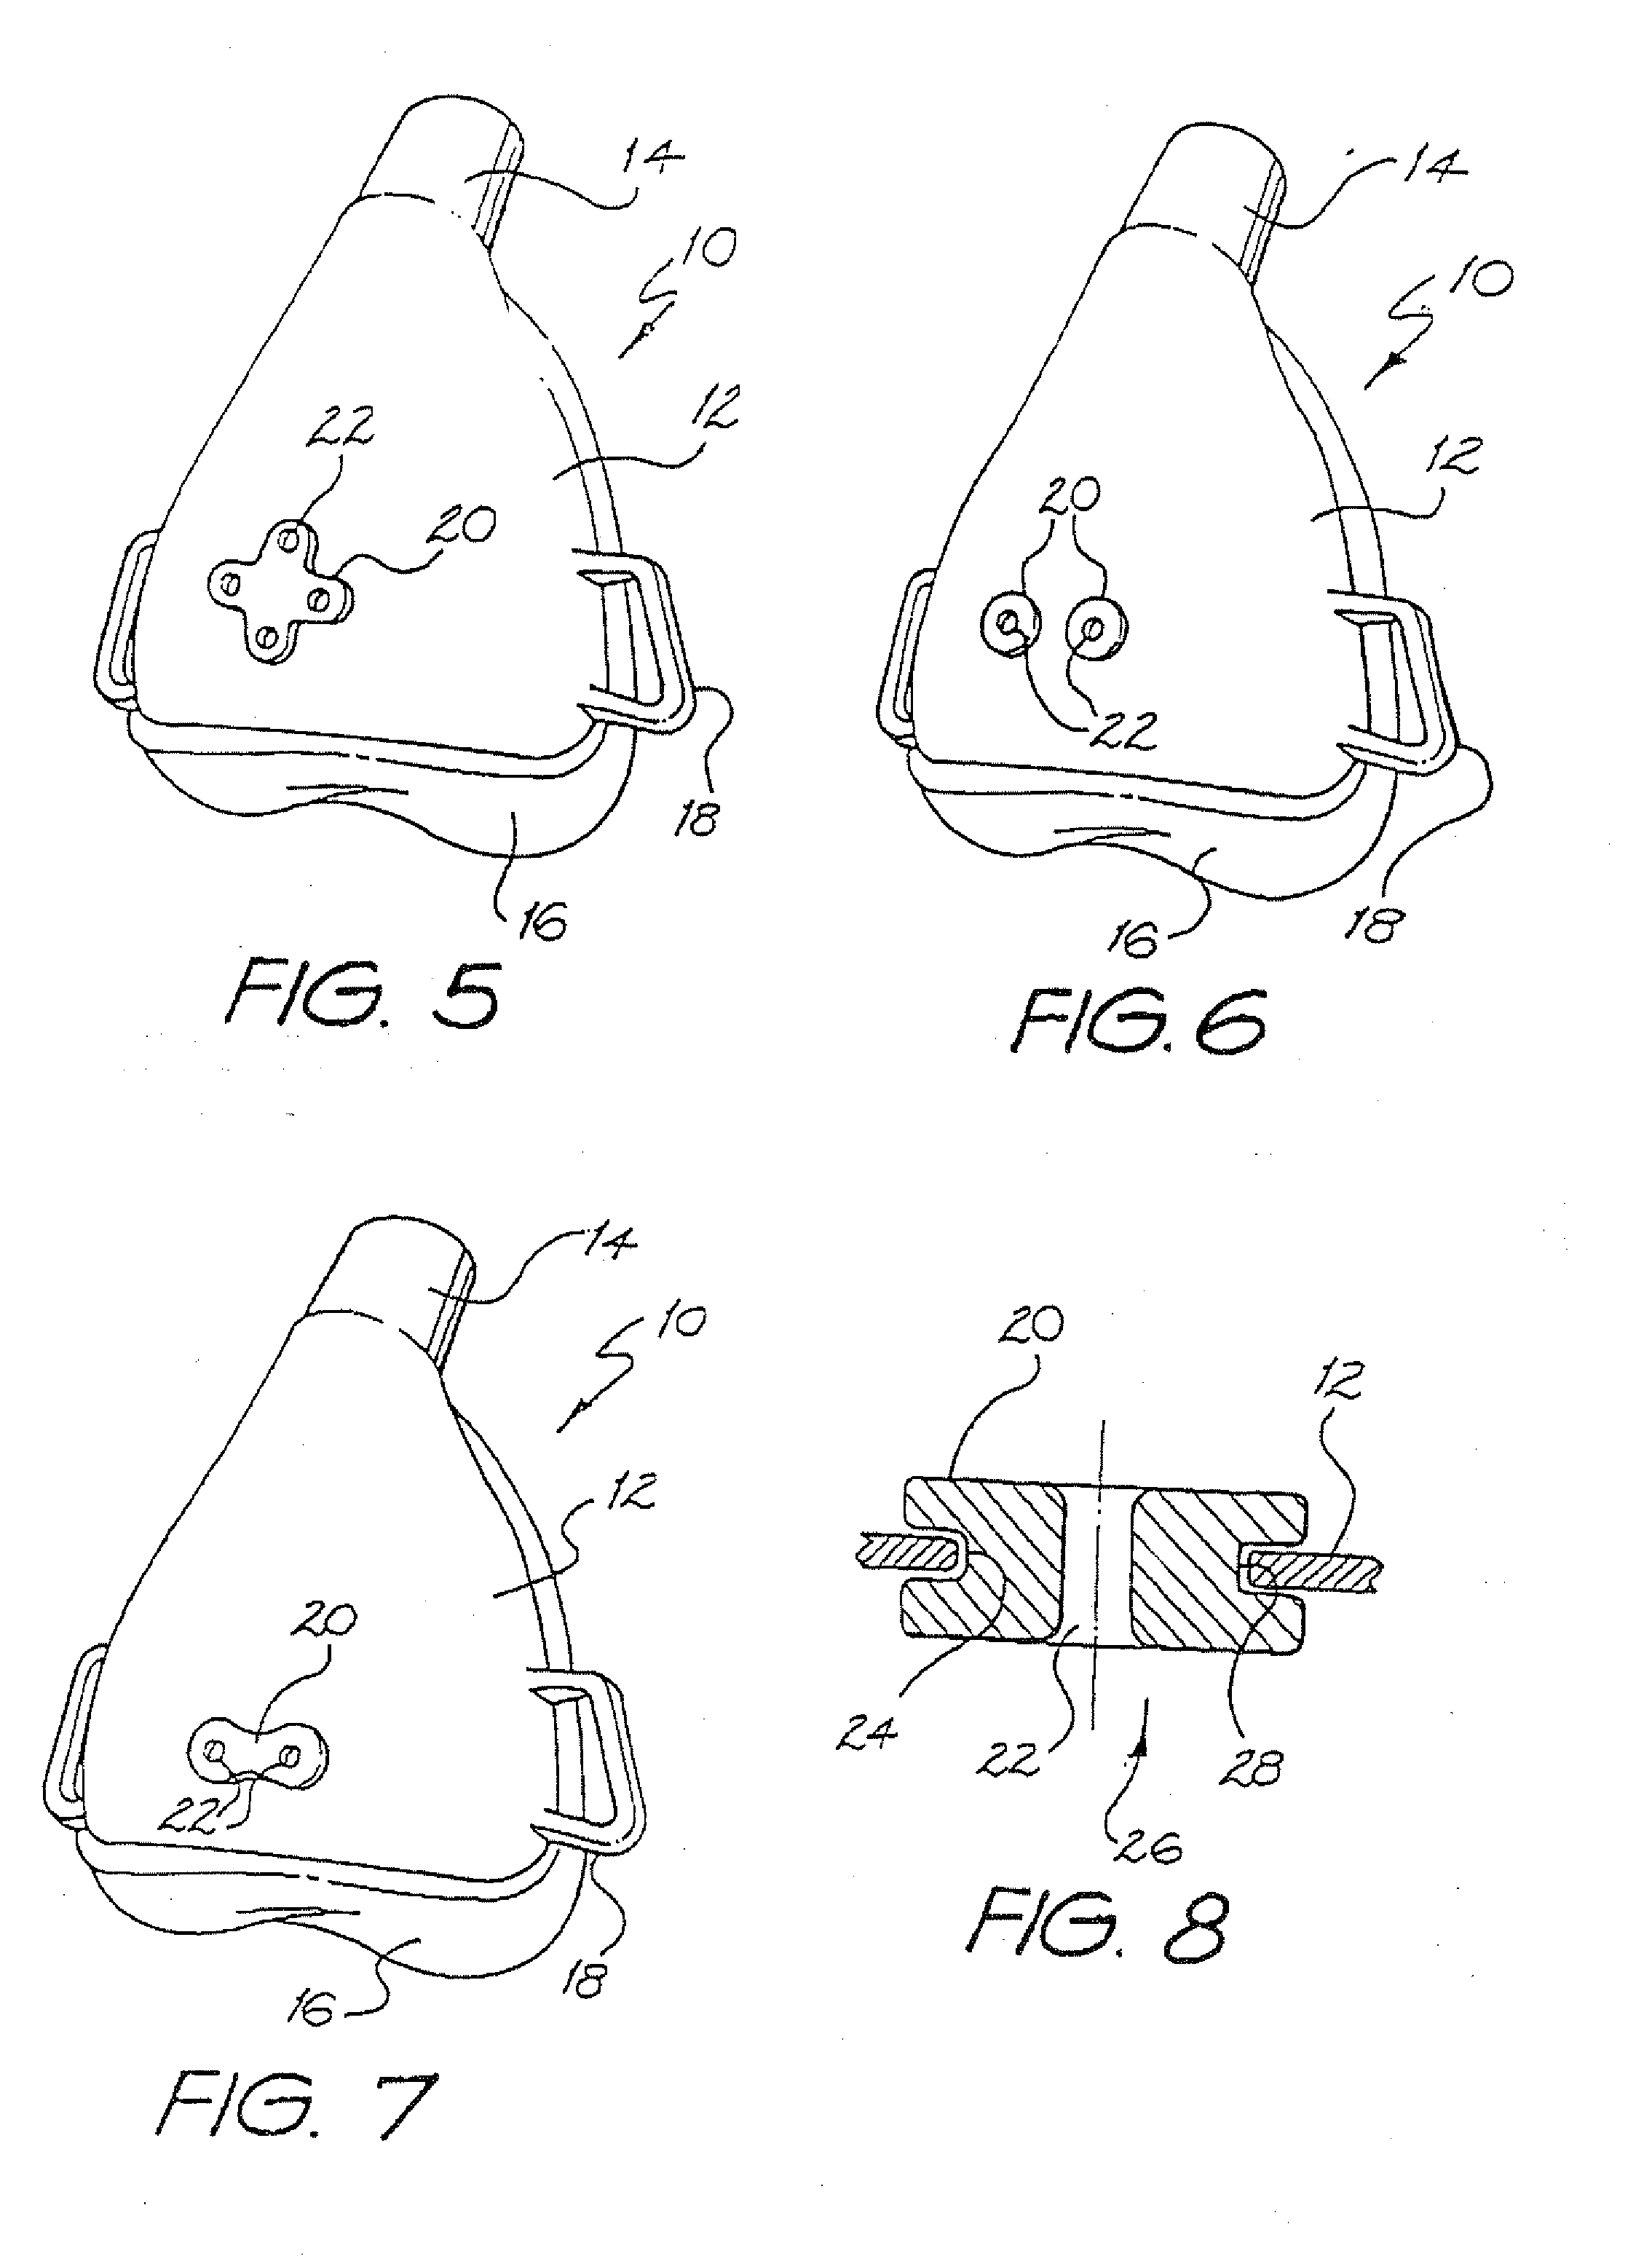 Mask and vent assembly therefor